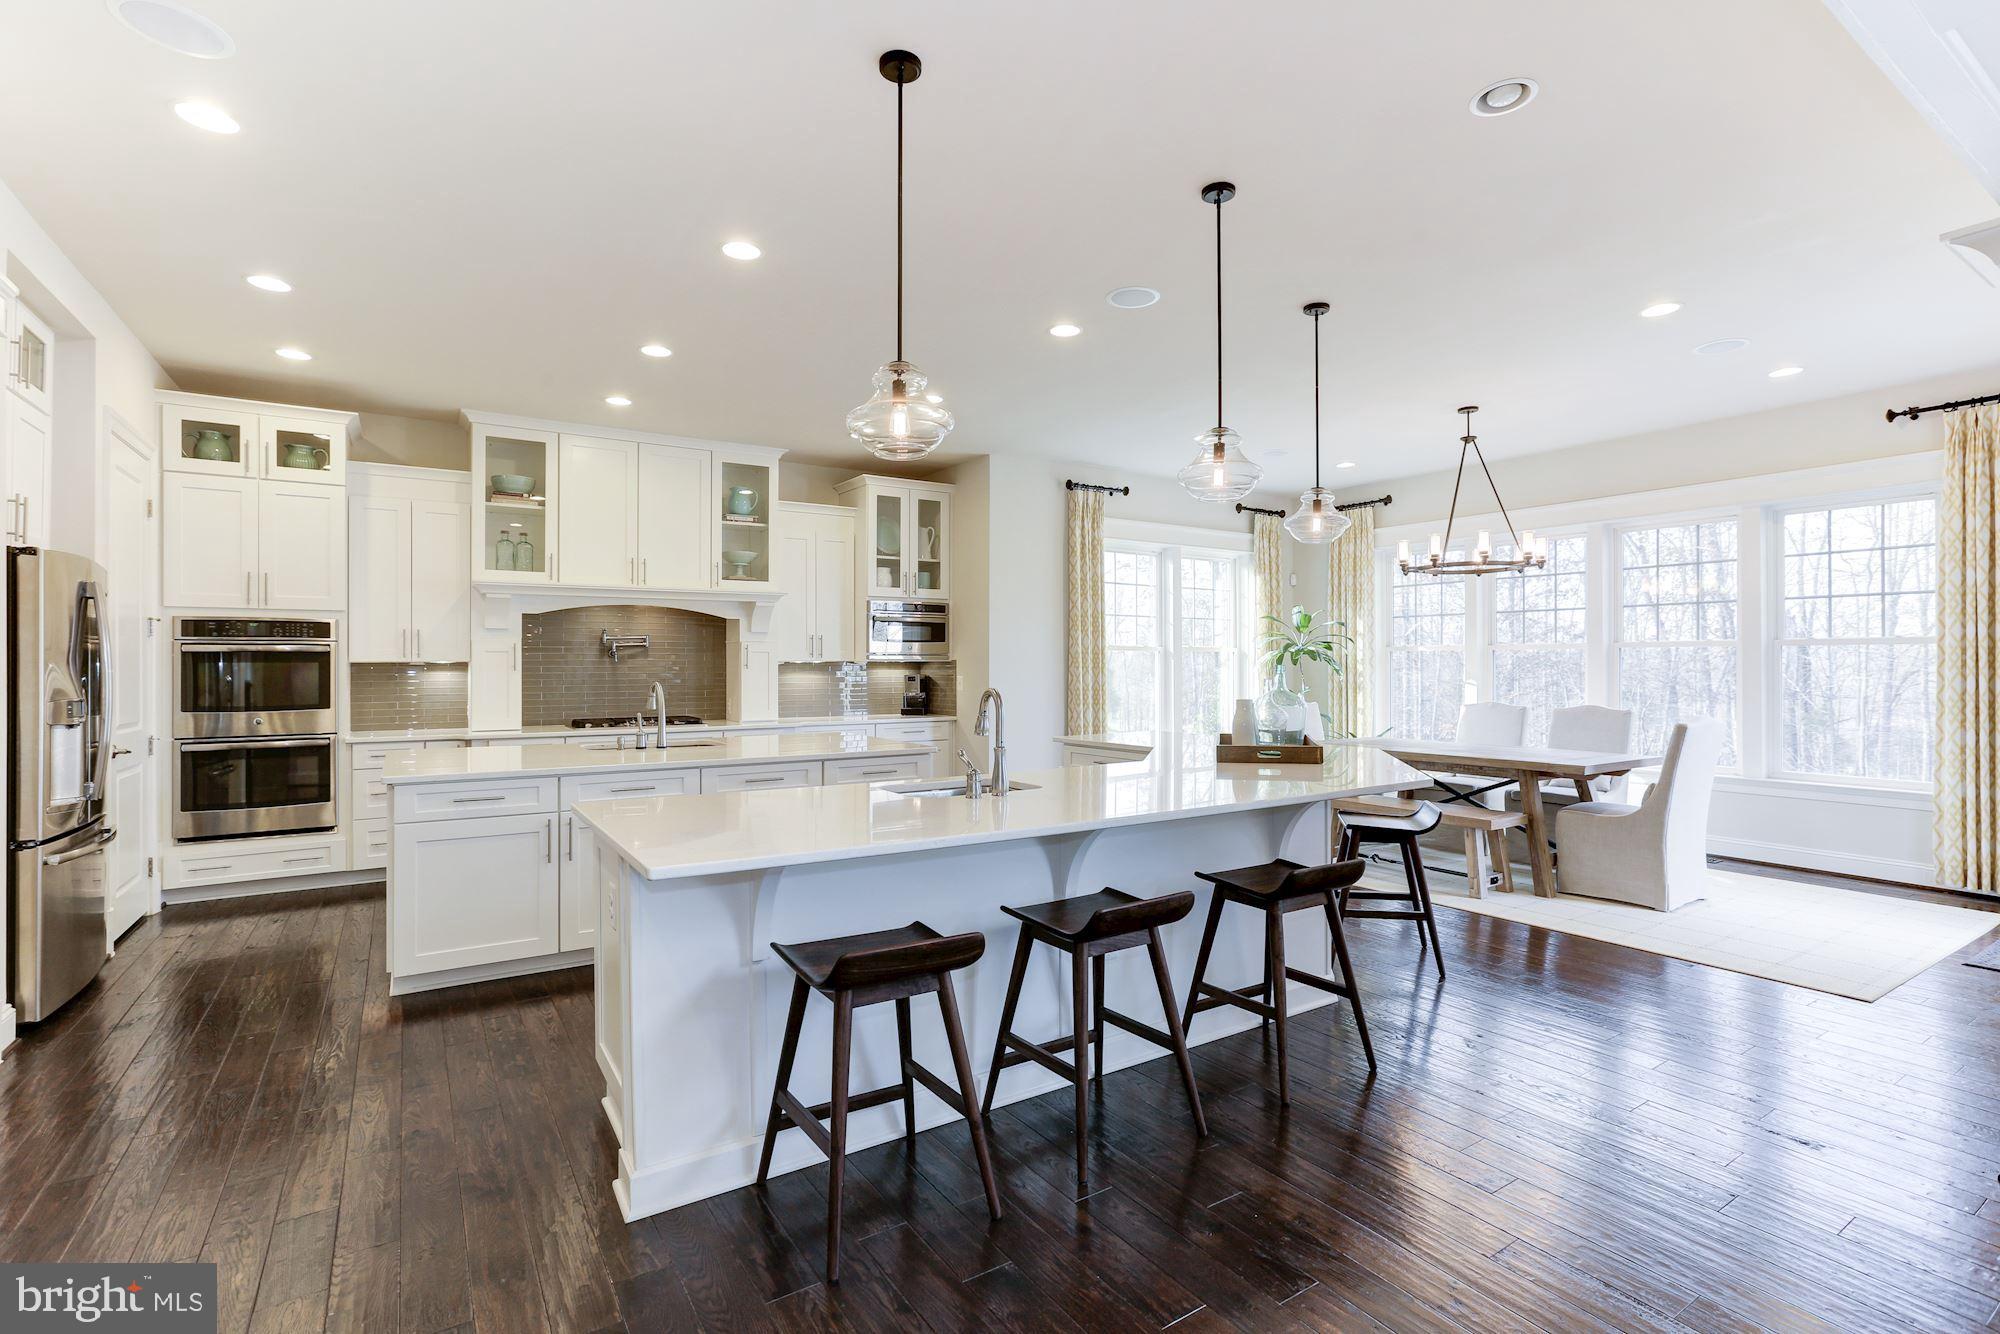 a kitchen with stainless steel appliances granite countertop a kitchen island hardwood floor and a sink